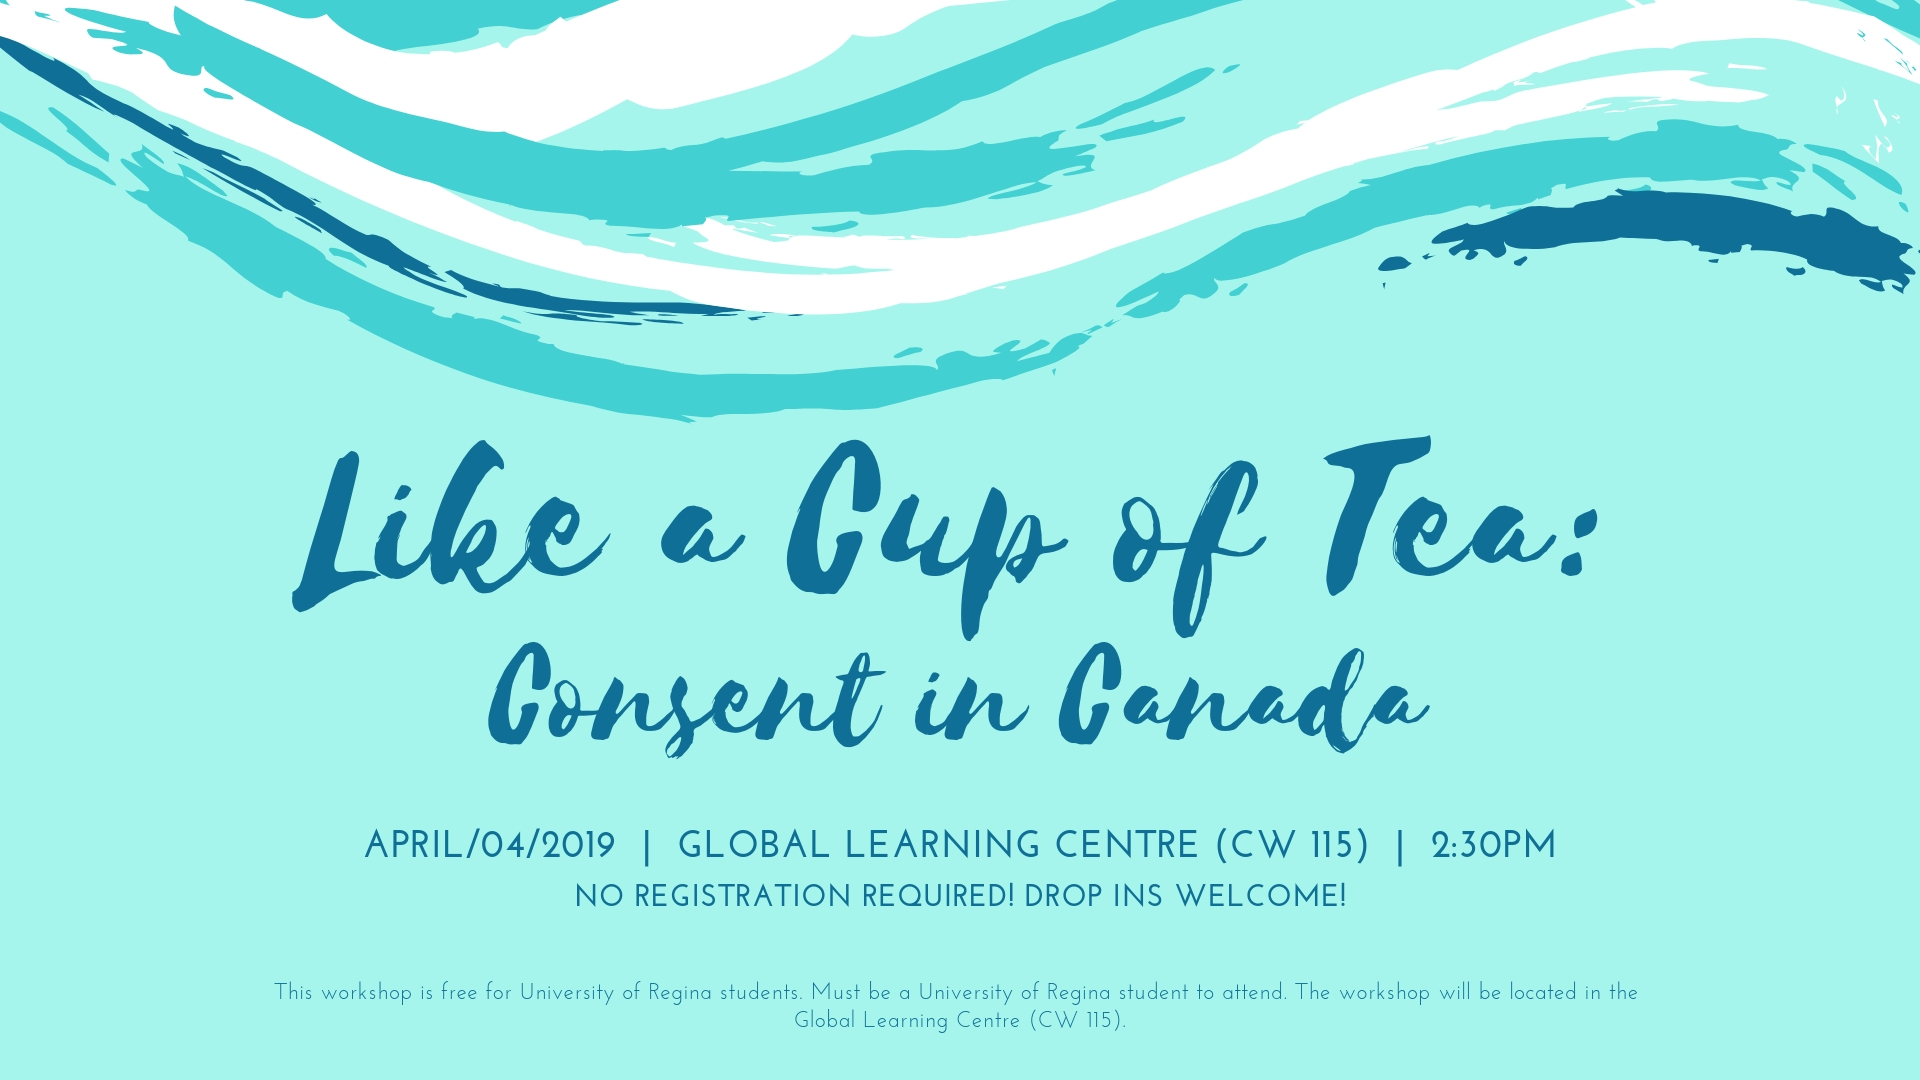 Consent in Canada Session